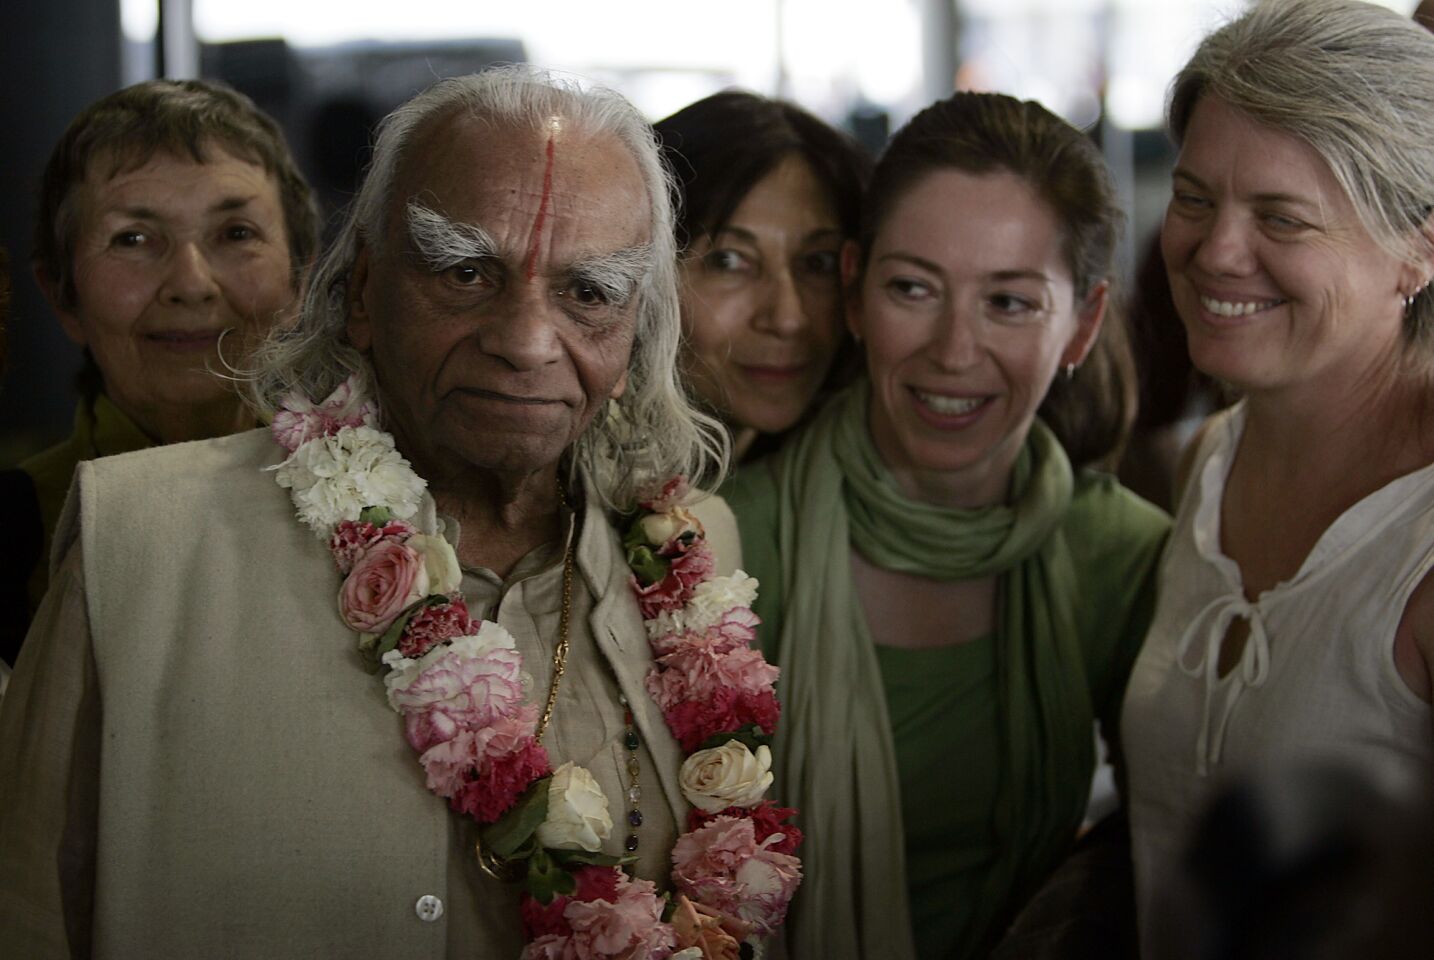 The Indian guru was one of the West's most influential teachers of yoga. He helped lay the foundation for its explosive growth and attained rock-star status with tens of thousands of followers. He was 95.